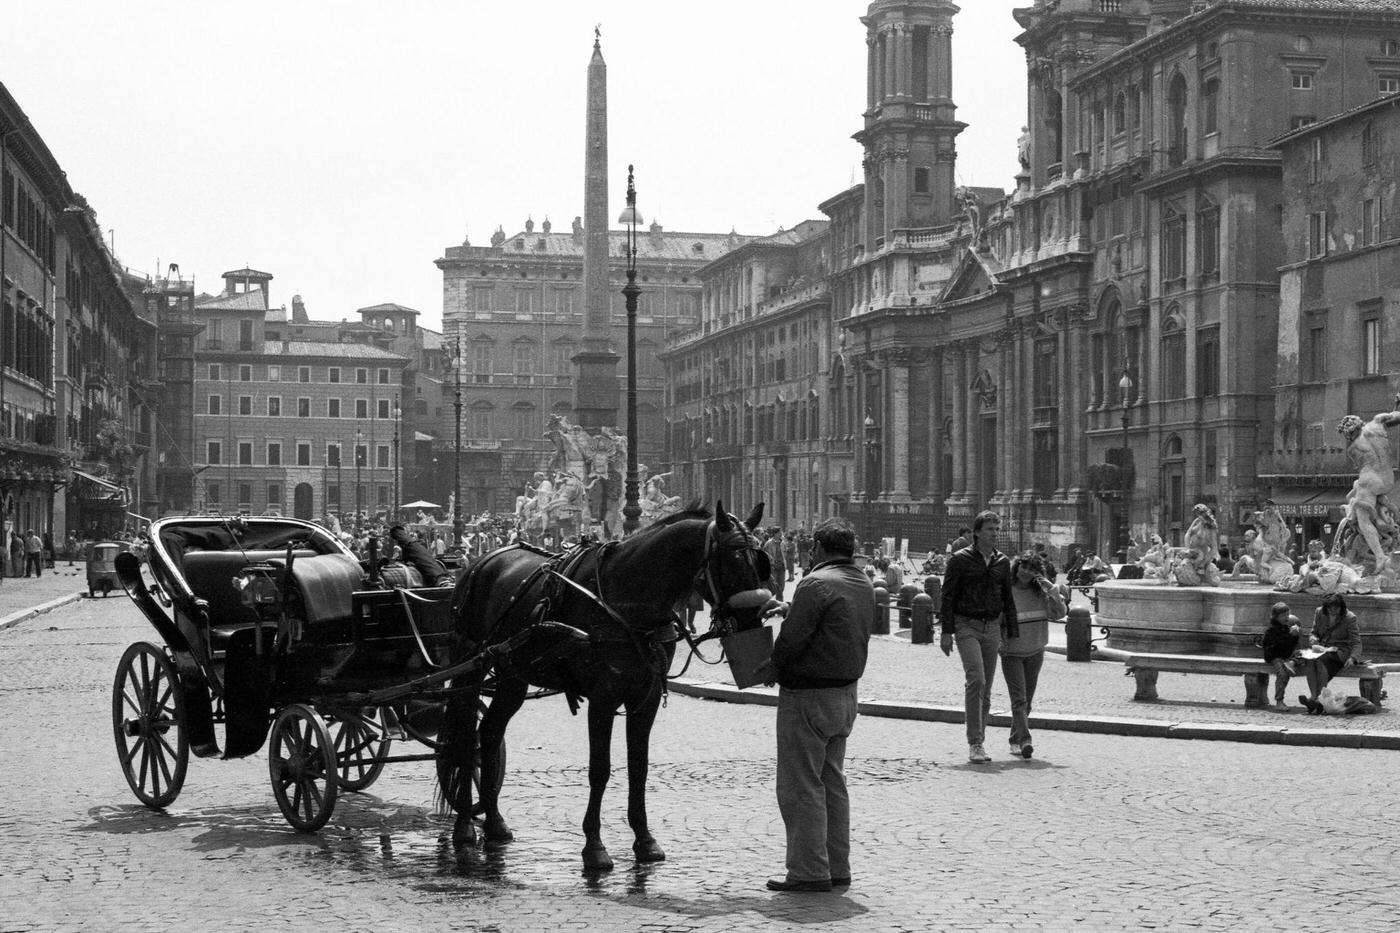 Horse and Carriage in Piazza Navona, Rome, 1986